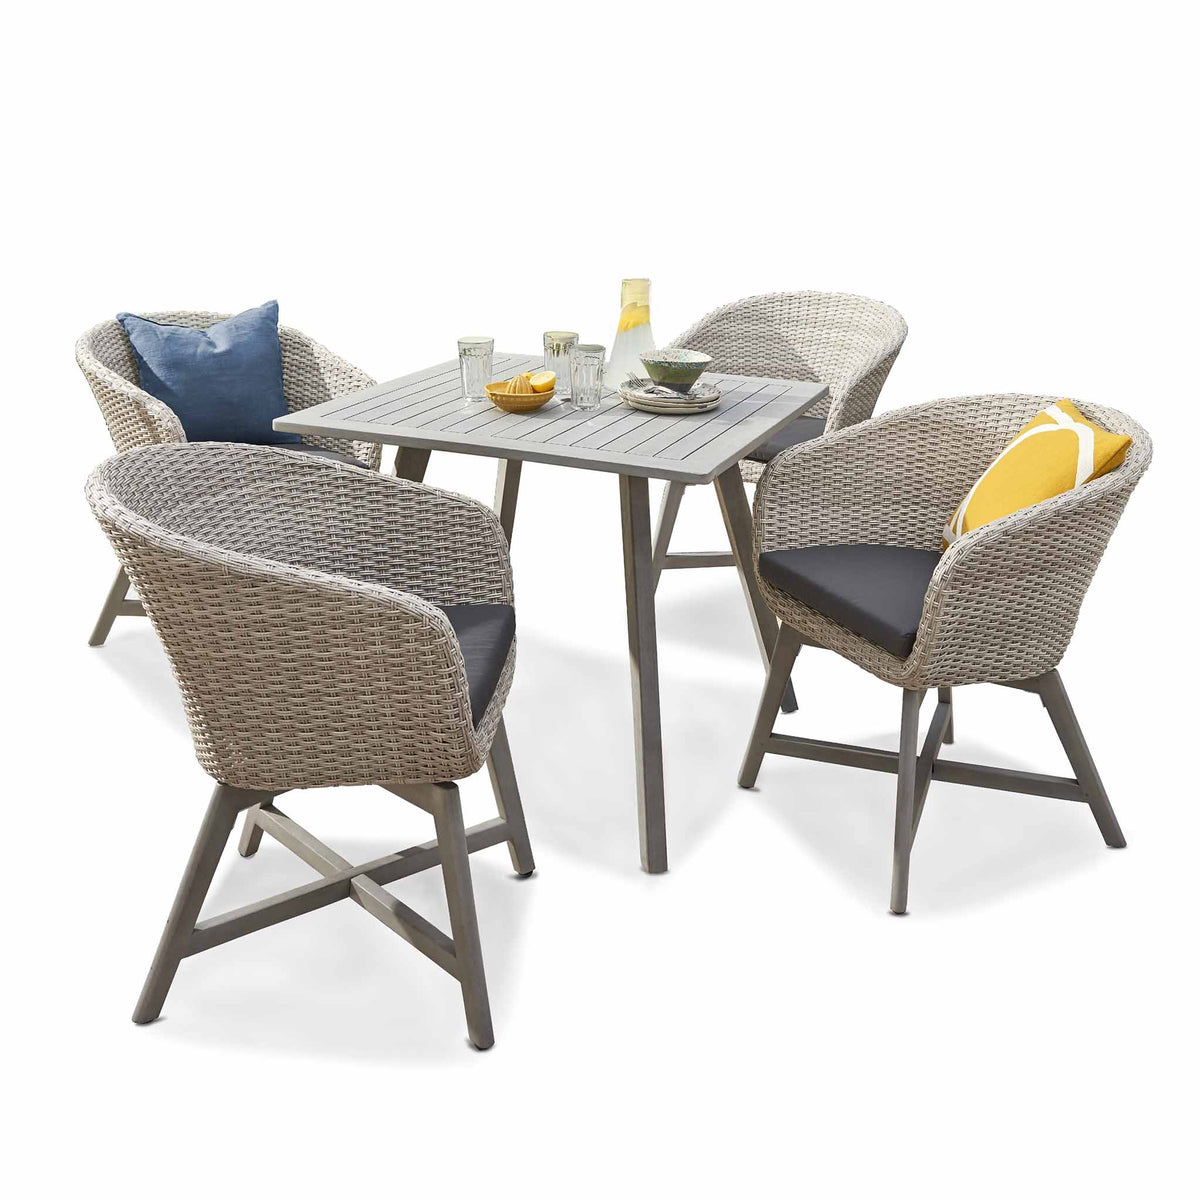 Chatsworth Rattan 4 Seat Dining Set by Roseland Furniture